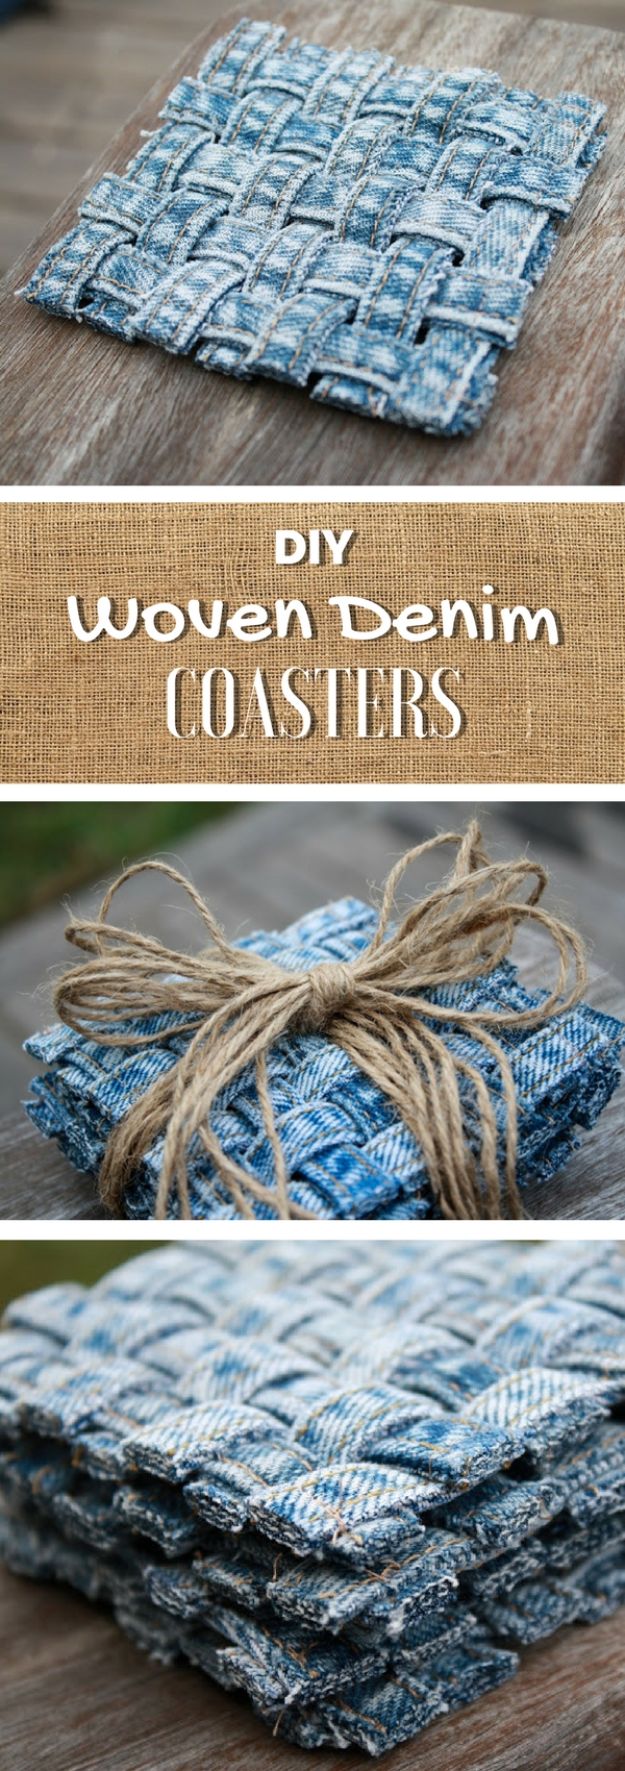 Blue Jean Upcycles - Woven Jean Seam Coasters - Ways to Make Old Denim Jeans Into DIY Home Decor, Handmade Gifts and Creative Fashion - Transform Old Blue Jeans into Pillows, Rugs, Kitchen and Living Room Decor, Easy Sewing Projects for Beginners #sewing #diy #crafts #upcycle